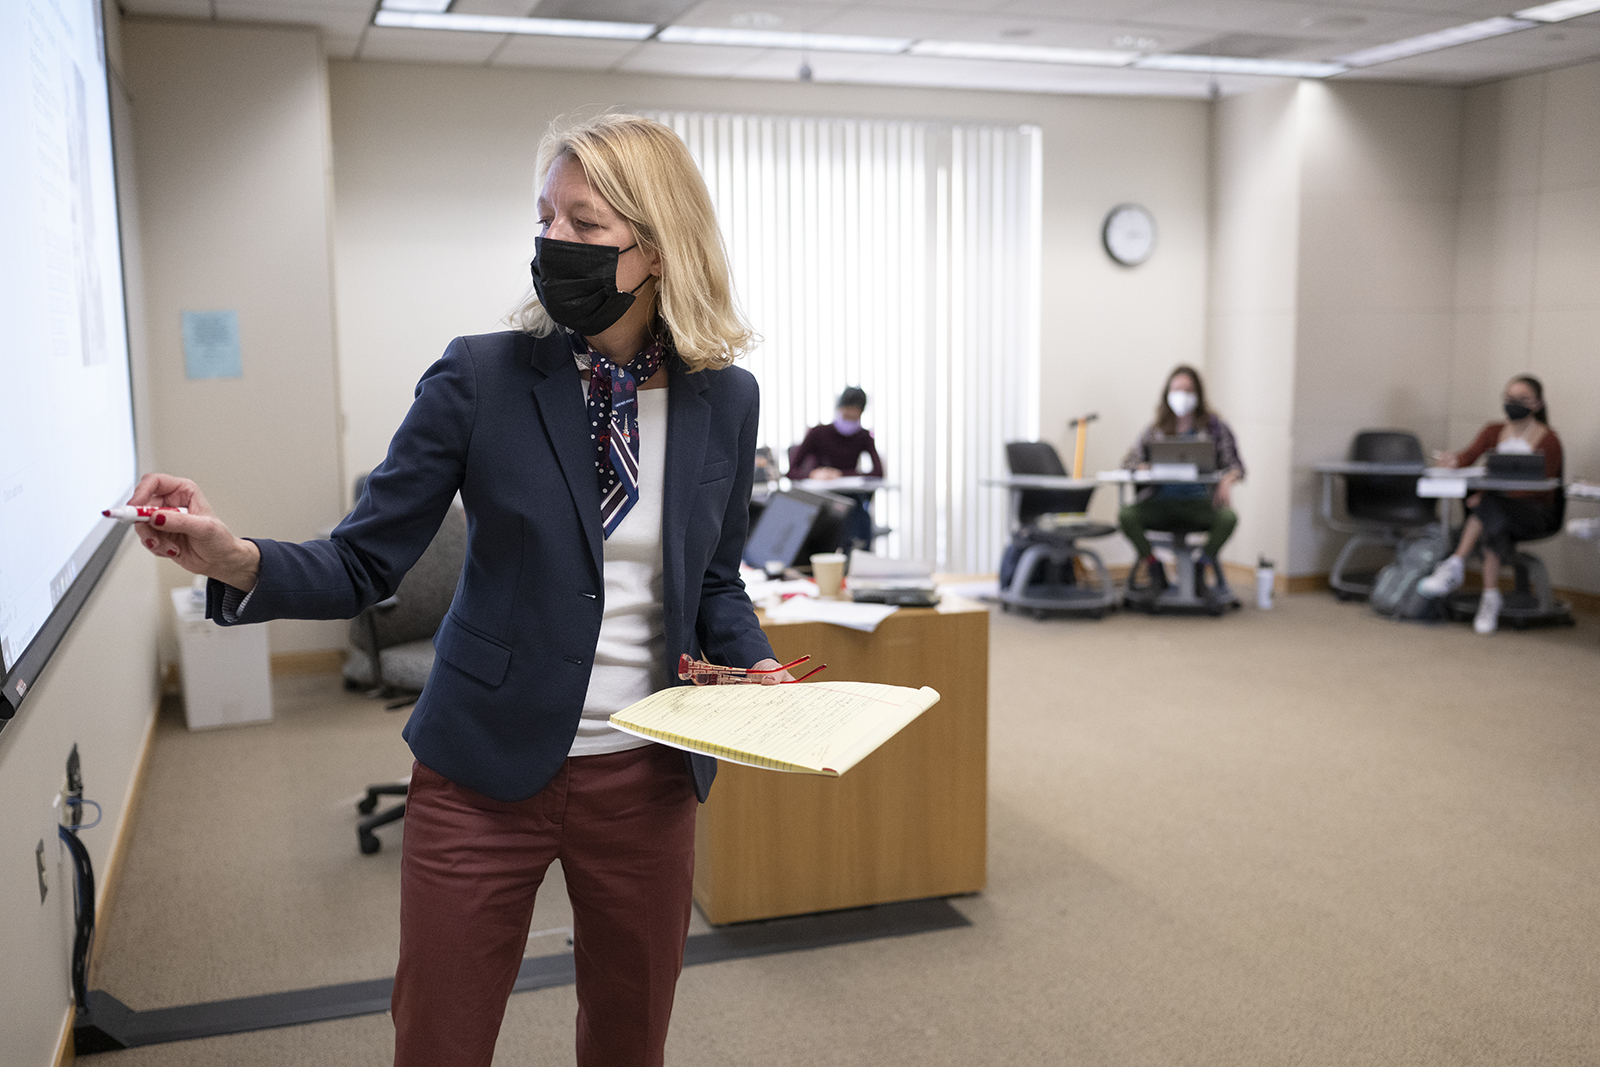 Candid photo of Professor Wendy Lower lecturing in front of a marker board and projector while a ring of students sit behind her.